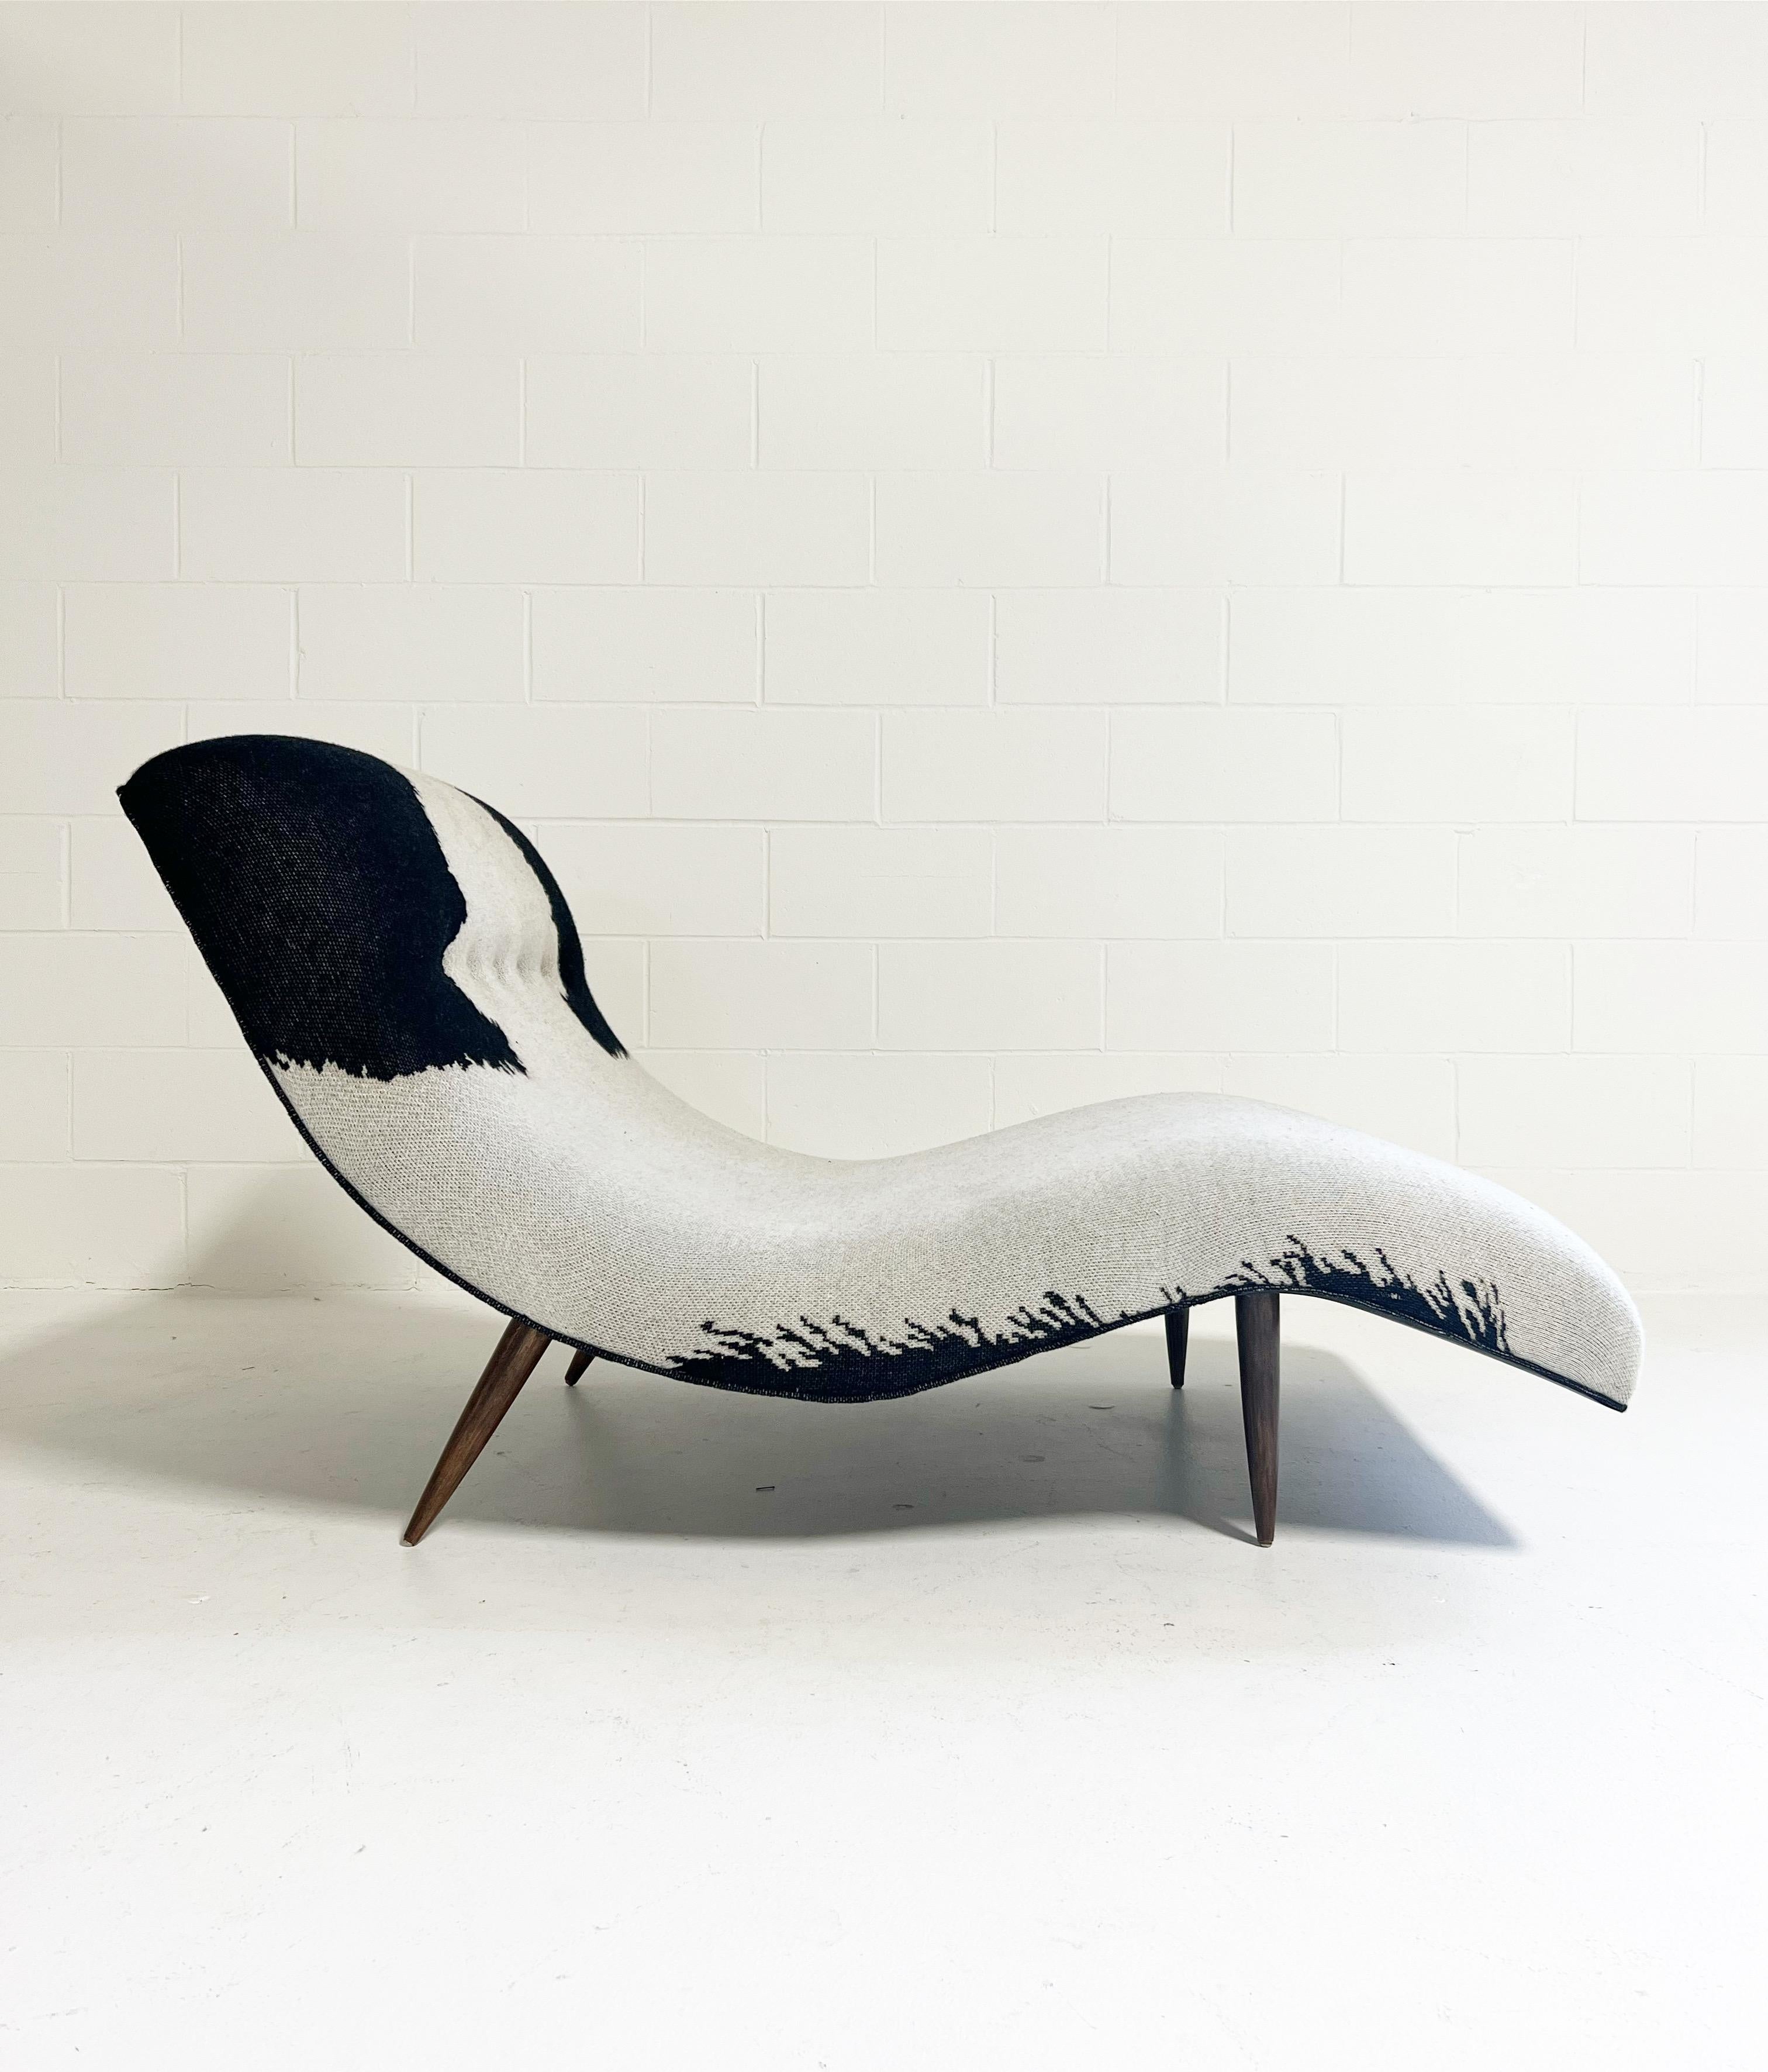 This is an original Adrian Pearsall wave chaise lounge. Adrian Pearsall began his career as an architect but dabbled in furniture design, quickly becoming a leader in the modernist furniture movement. We upholstered the lounge with a cashmere throw